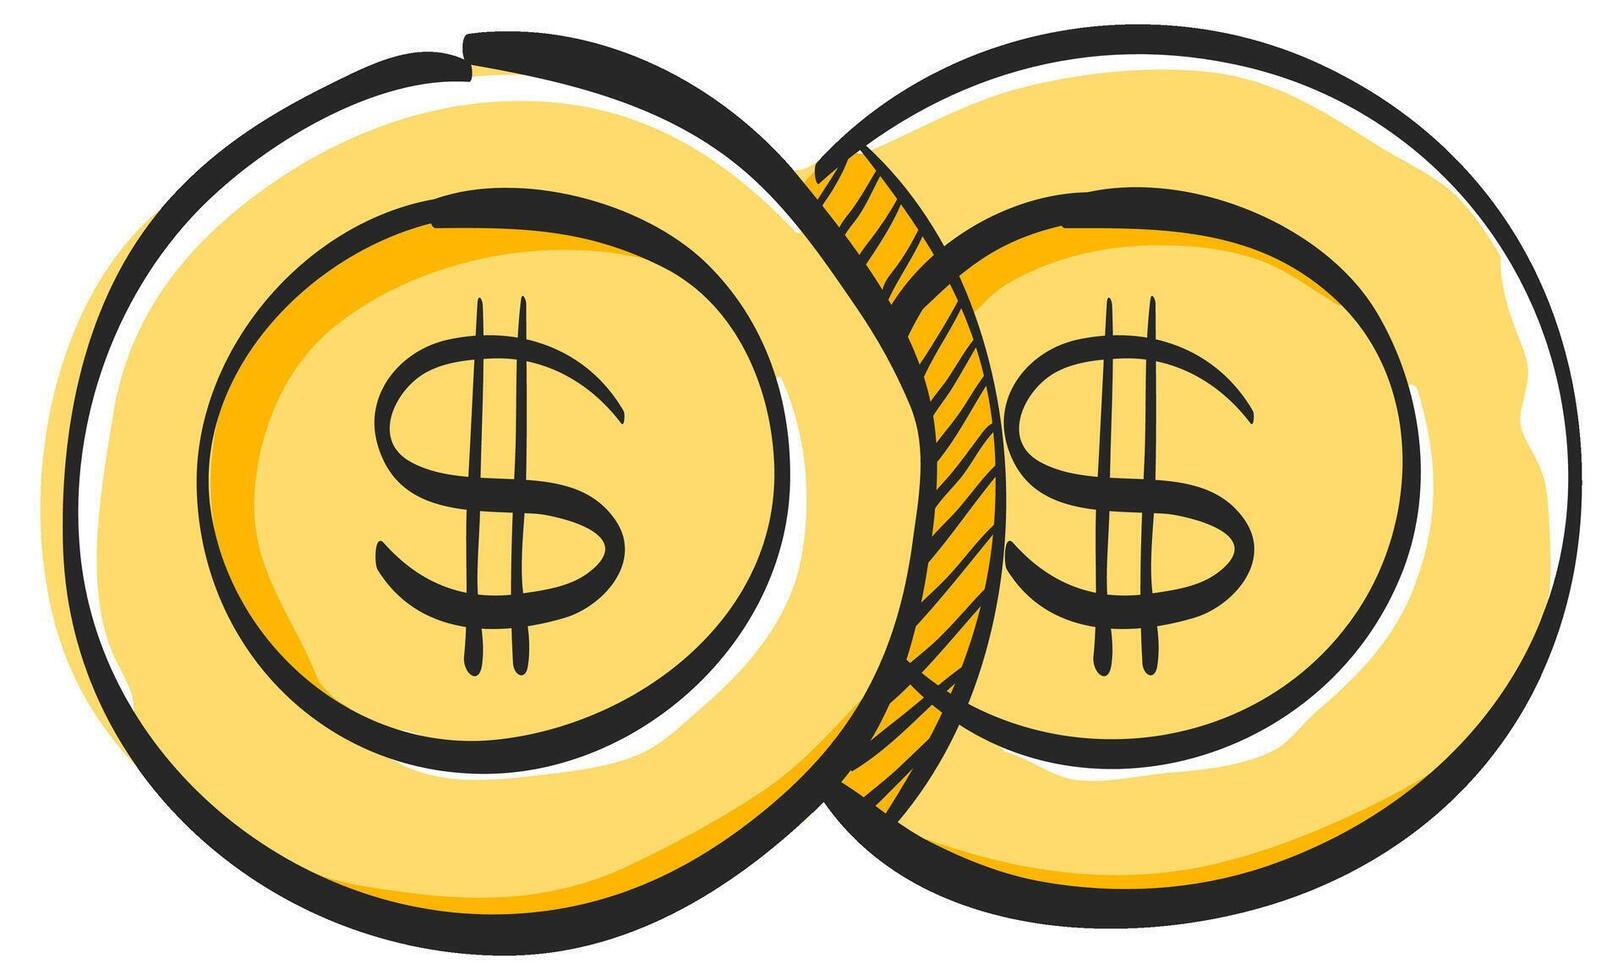 Coin money icon in hand drawn color vector illustration